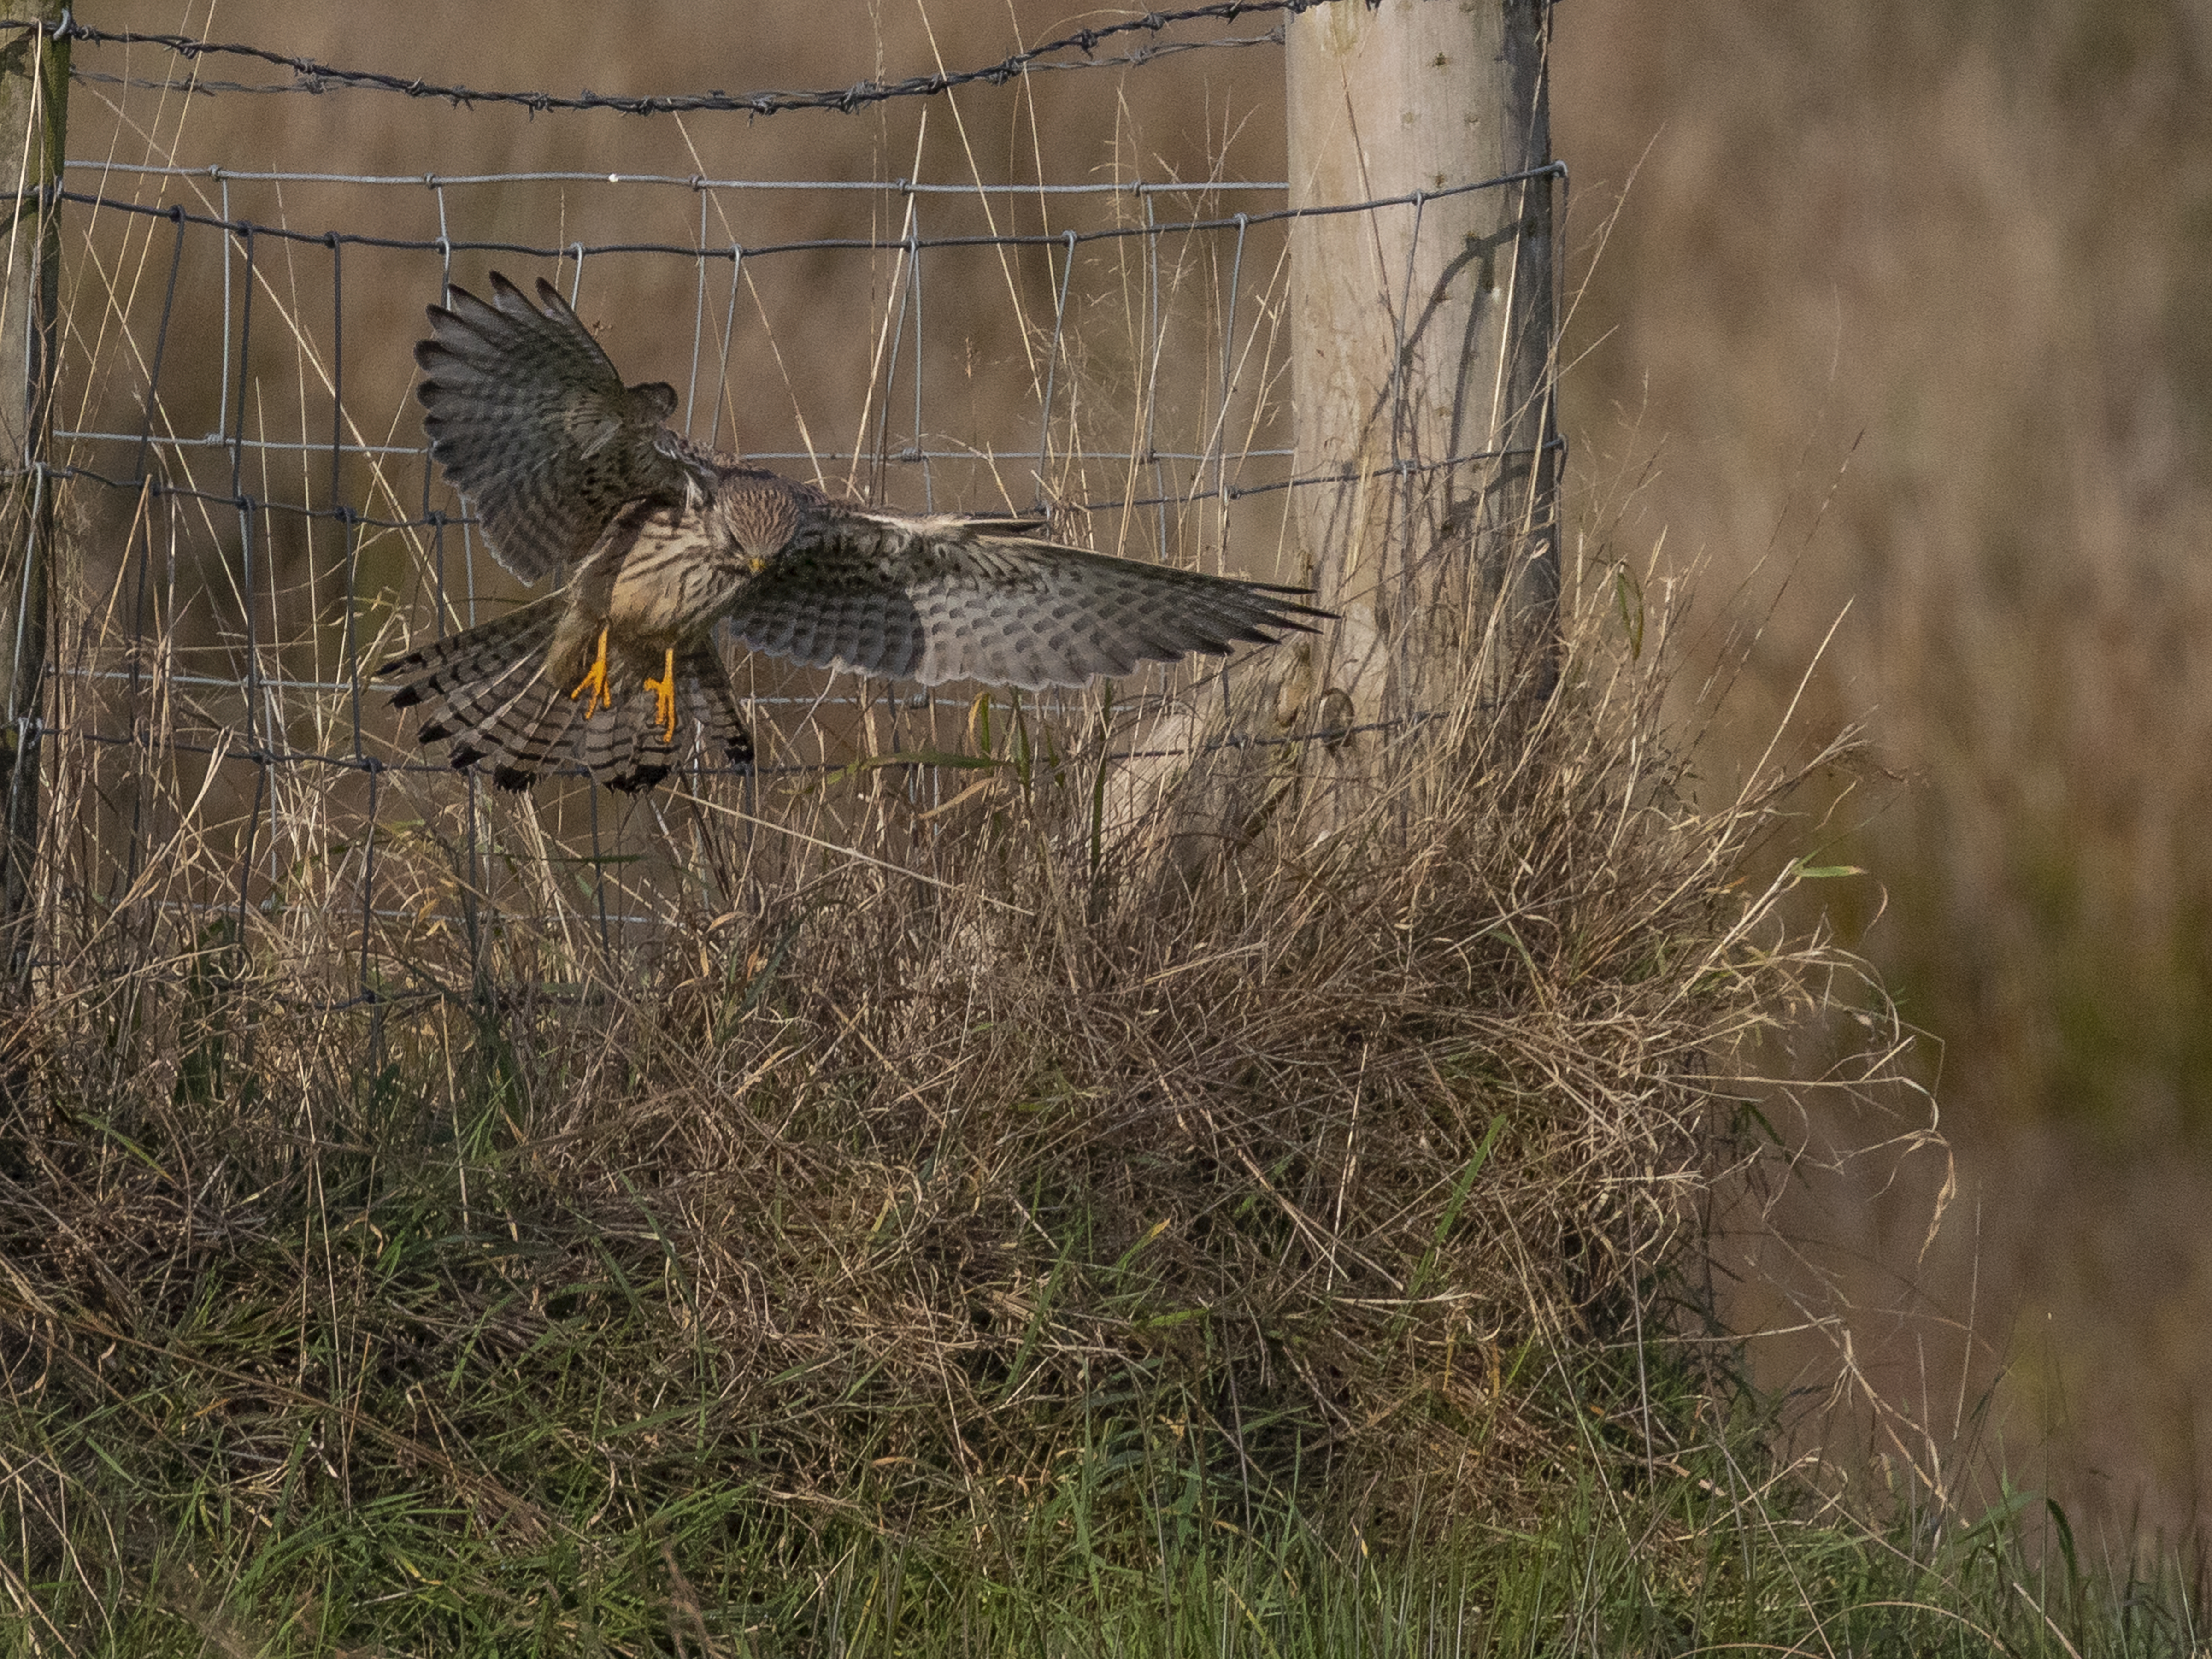 Kestrel about to pounce by fence post - credit Alex Hillier (121).jpg